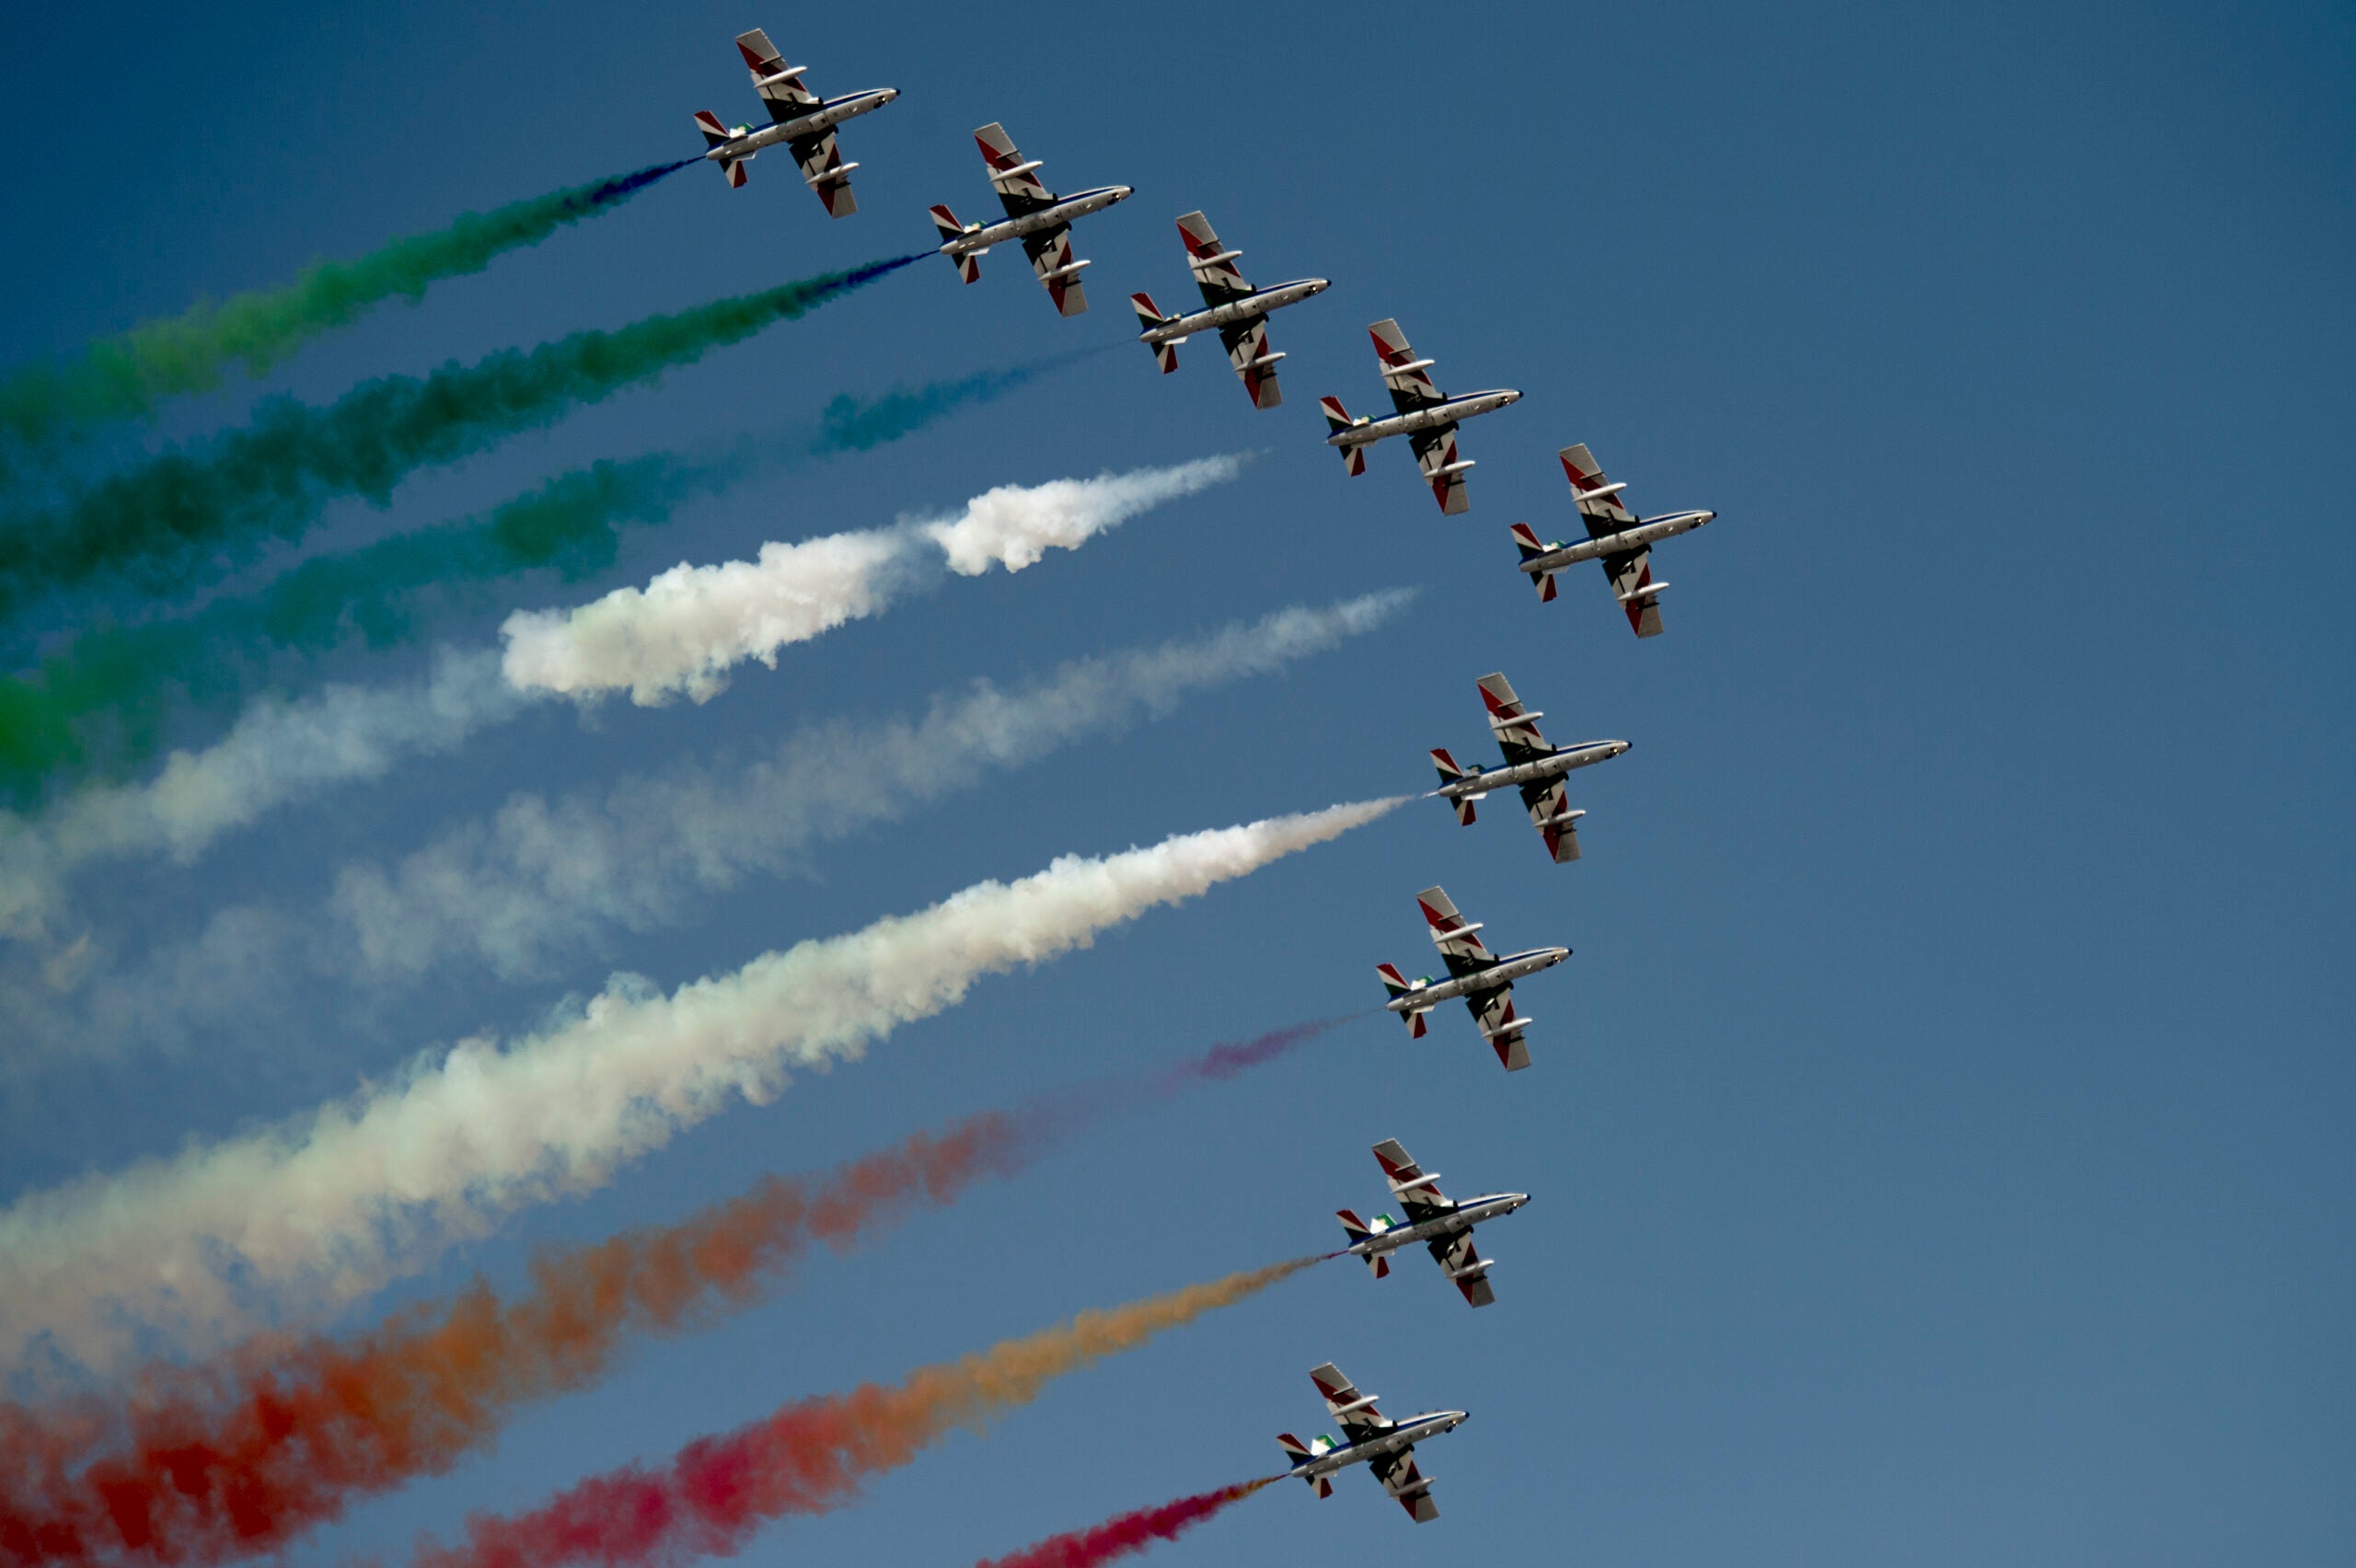 The Frecce Tricolori, the Italian Aeronatica Militare's aerobatic demonstration team, performs Nov. 10, 2015 at the 2015 Dubai Air Show, United Arab Emirates. The air show is a biennial event and is recognized as the premier aviation and air industry event in the Gulf and Middle East region and is one of the largest air shows in the world. (U.S. Air Force photo by Tech. Sgt. Nathan Lipscomb)